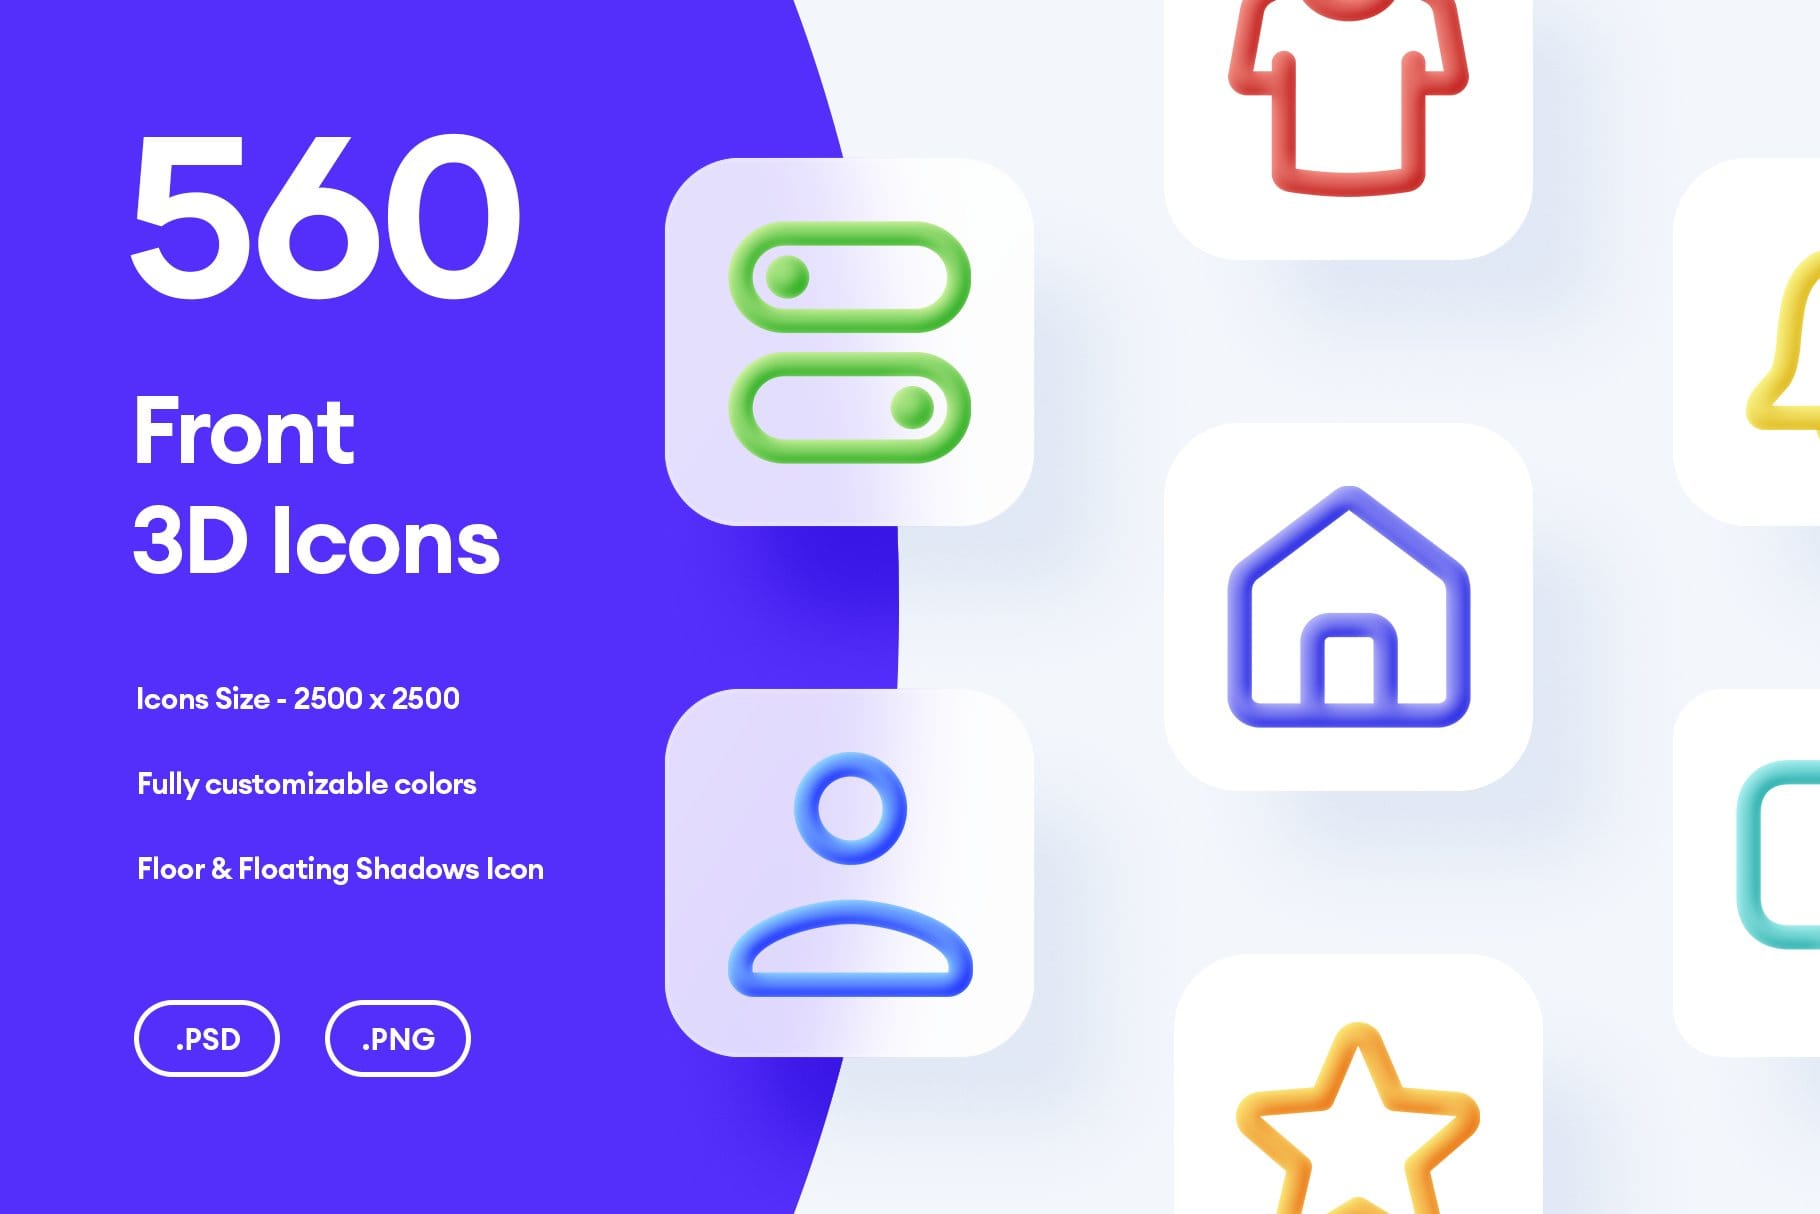 A full set of front 3D icons.